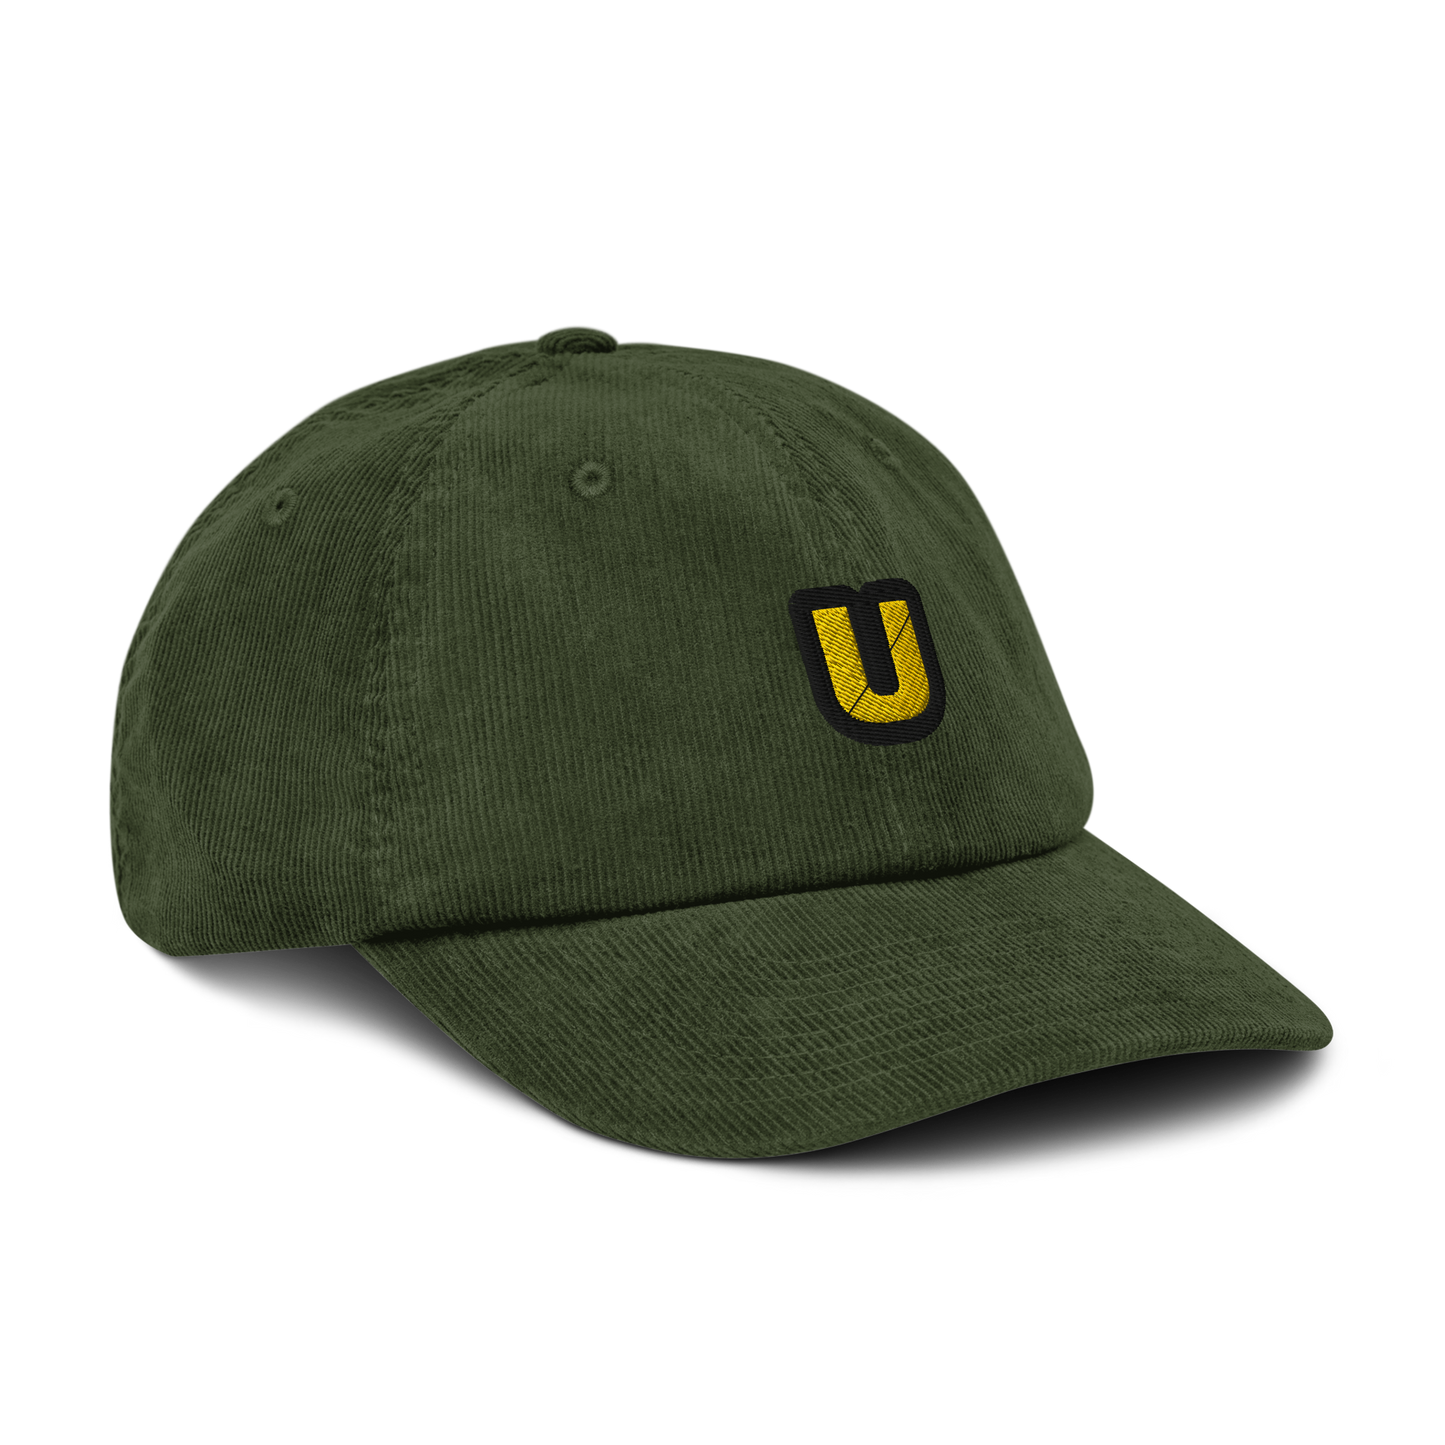 U - The letter collection - Corduroy hat